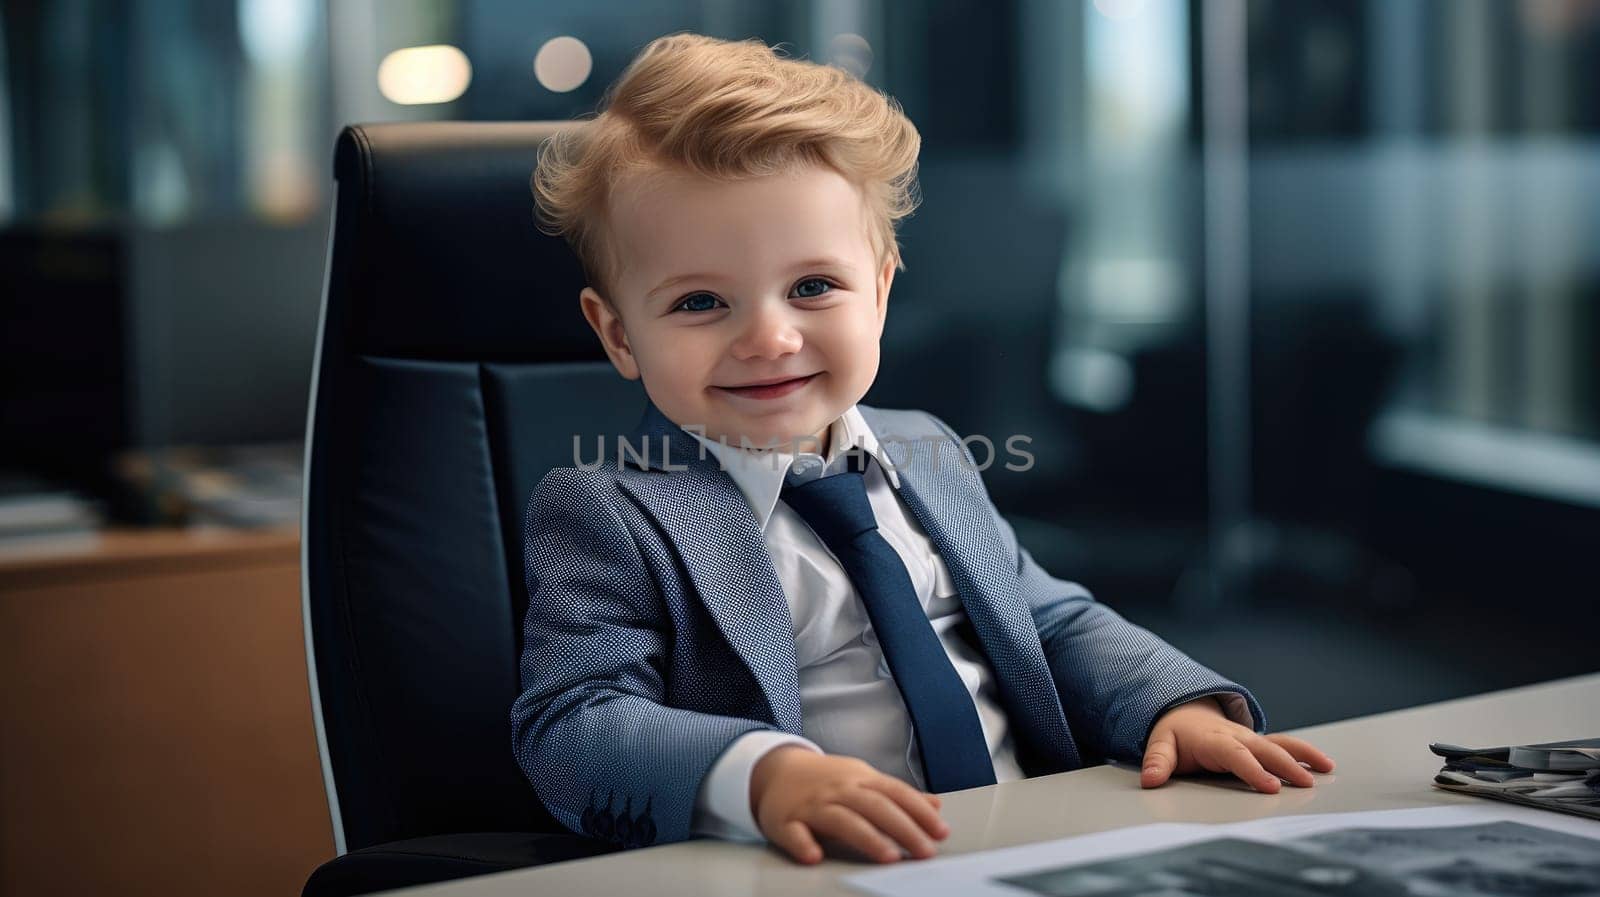 Cute business baby boy in suit working in the office joyfully smiling